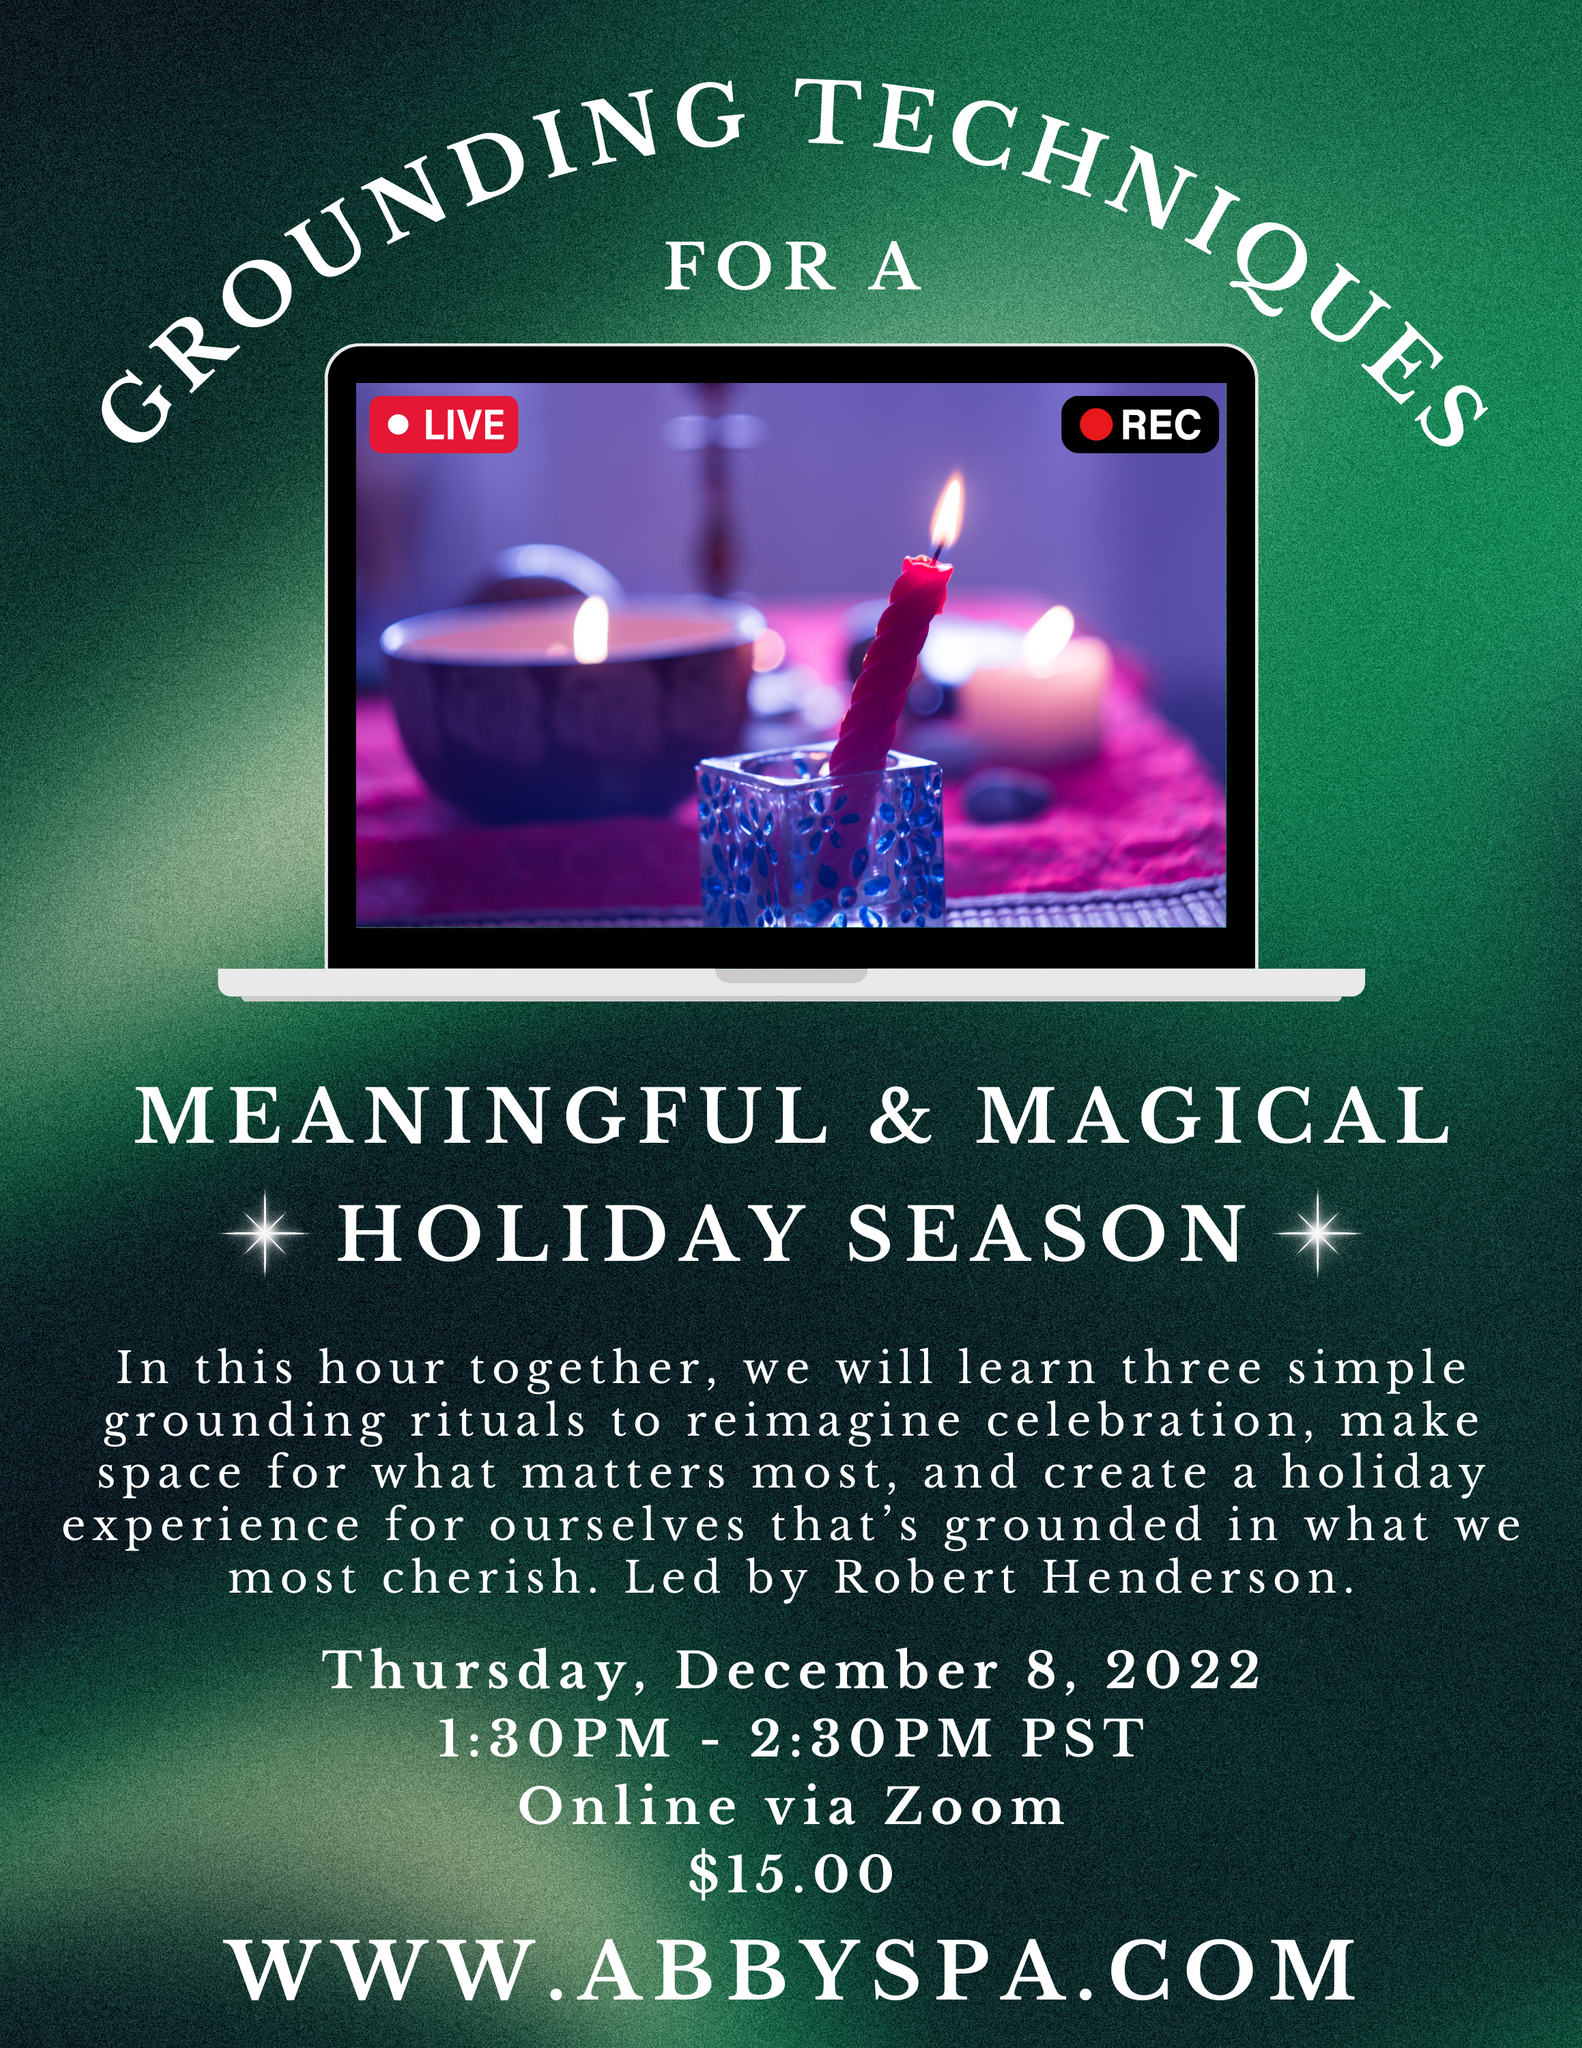 Grounding Techniques for a Meaningful & Magical Holiday Season